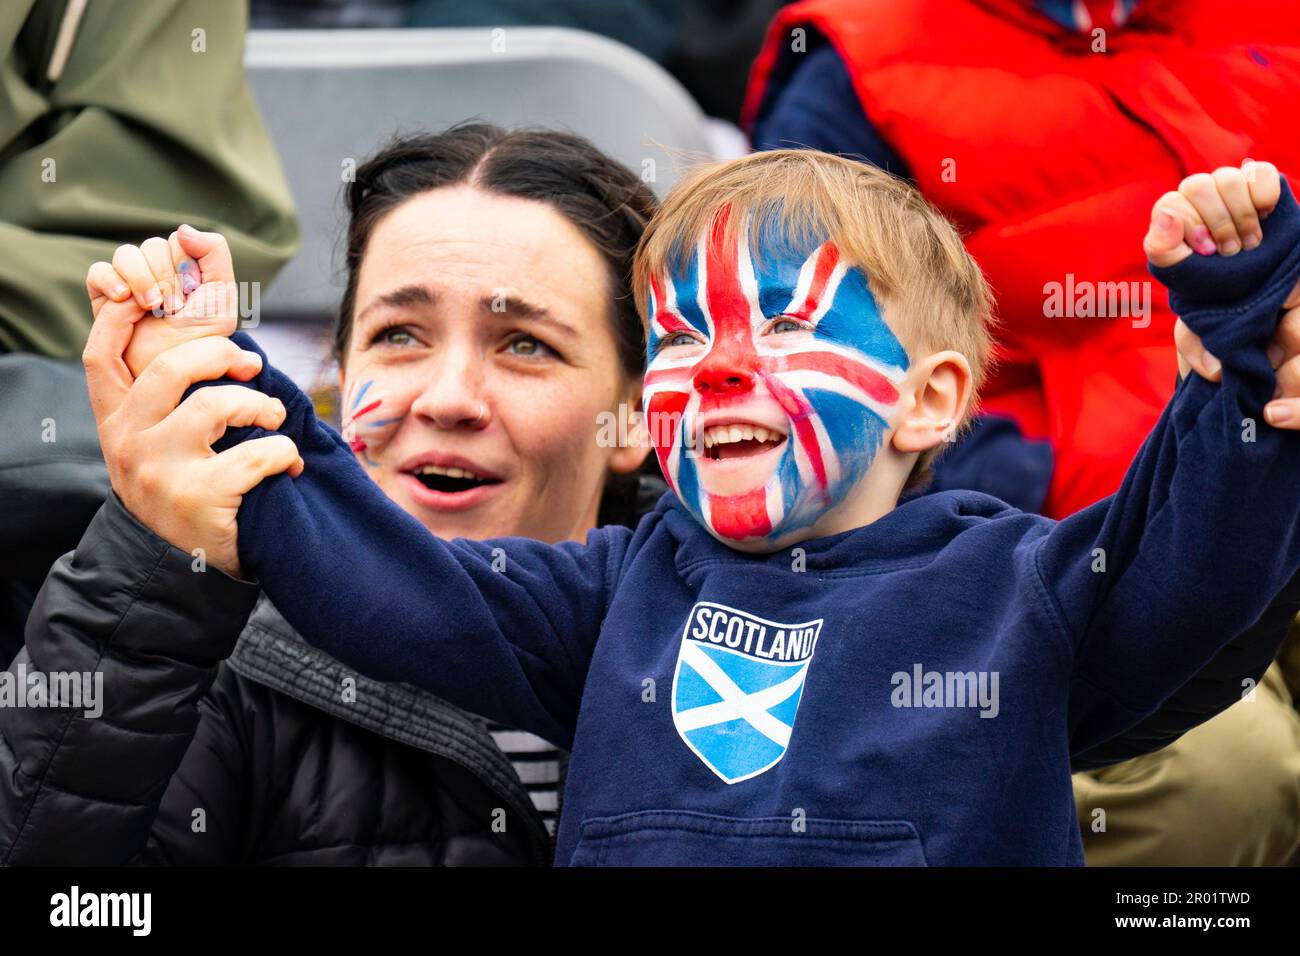 Edinburgh, Scotland, UK. 6 May 2023. Scenes from Edinburgh in West Princes Street Gardens on the day of Coronation of King Charles III. Young boy celebrates the crowning of King Charles III. Iain Masterton/Alamy Live News Stock Photo